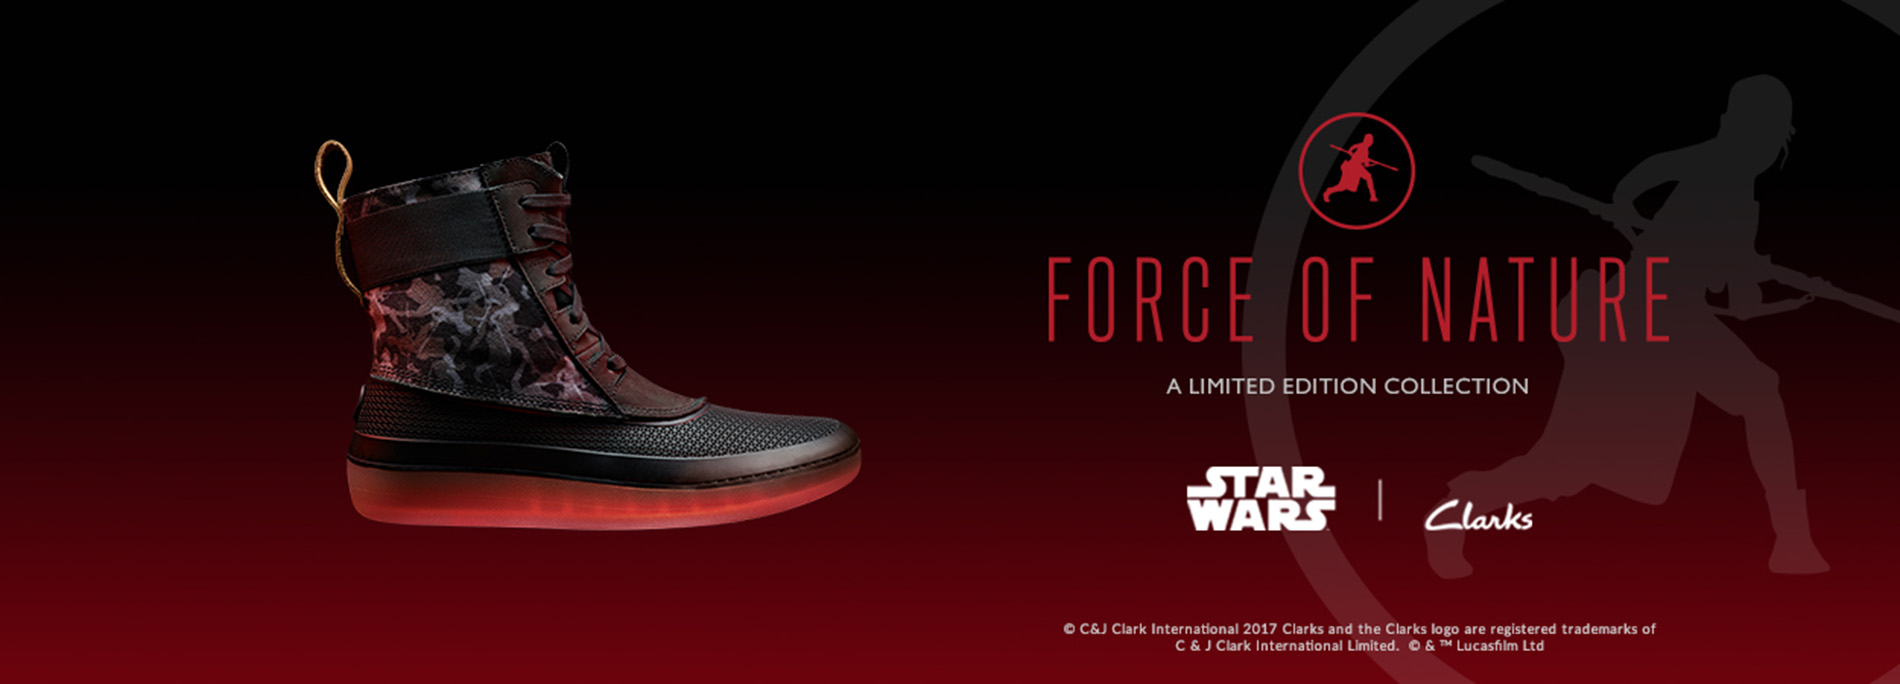 Clarks and Star Wars™ join forces to 